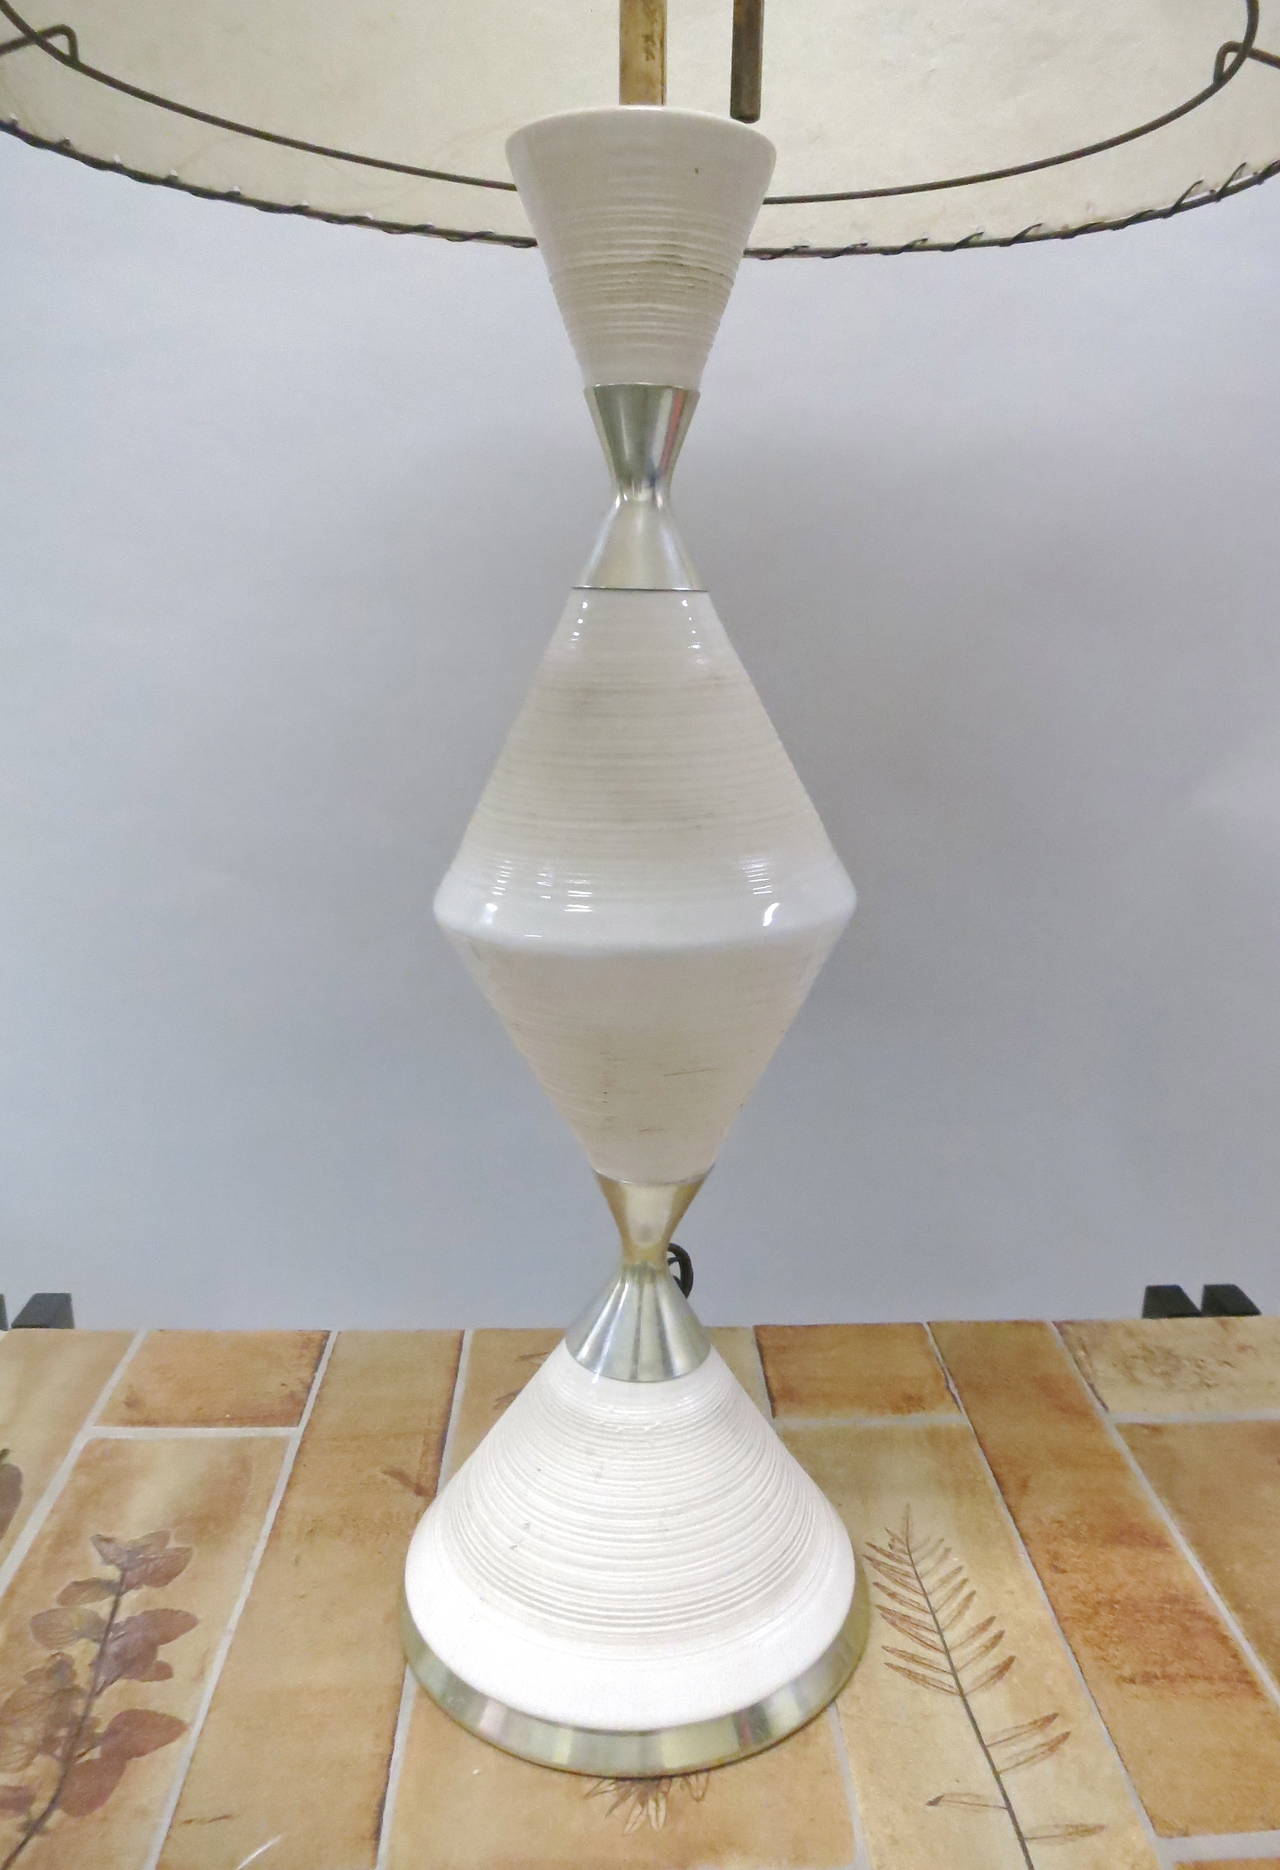 Table lamp has three levels of ceramic divided by polished brass with original shade in excellent vintage condition.